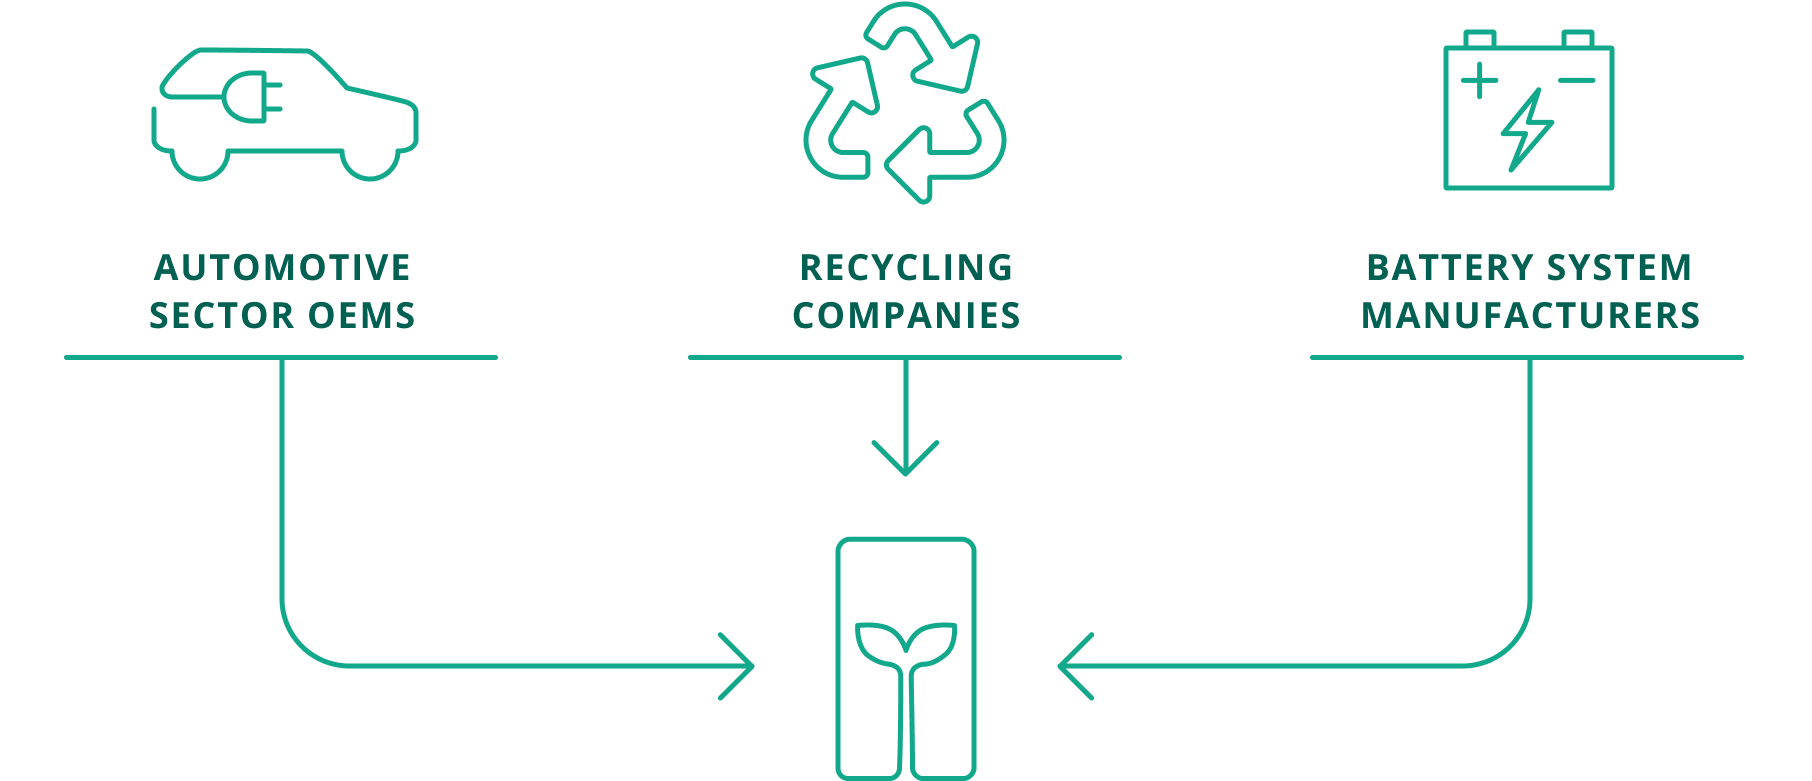 The diagram uses icons and arrows to show how TRICERA uses batteries from the automotive sector, recycling companies and battery system manufacturers in its battery storage systems.